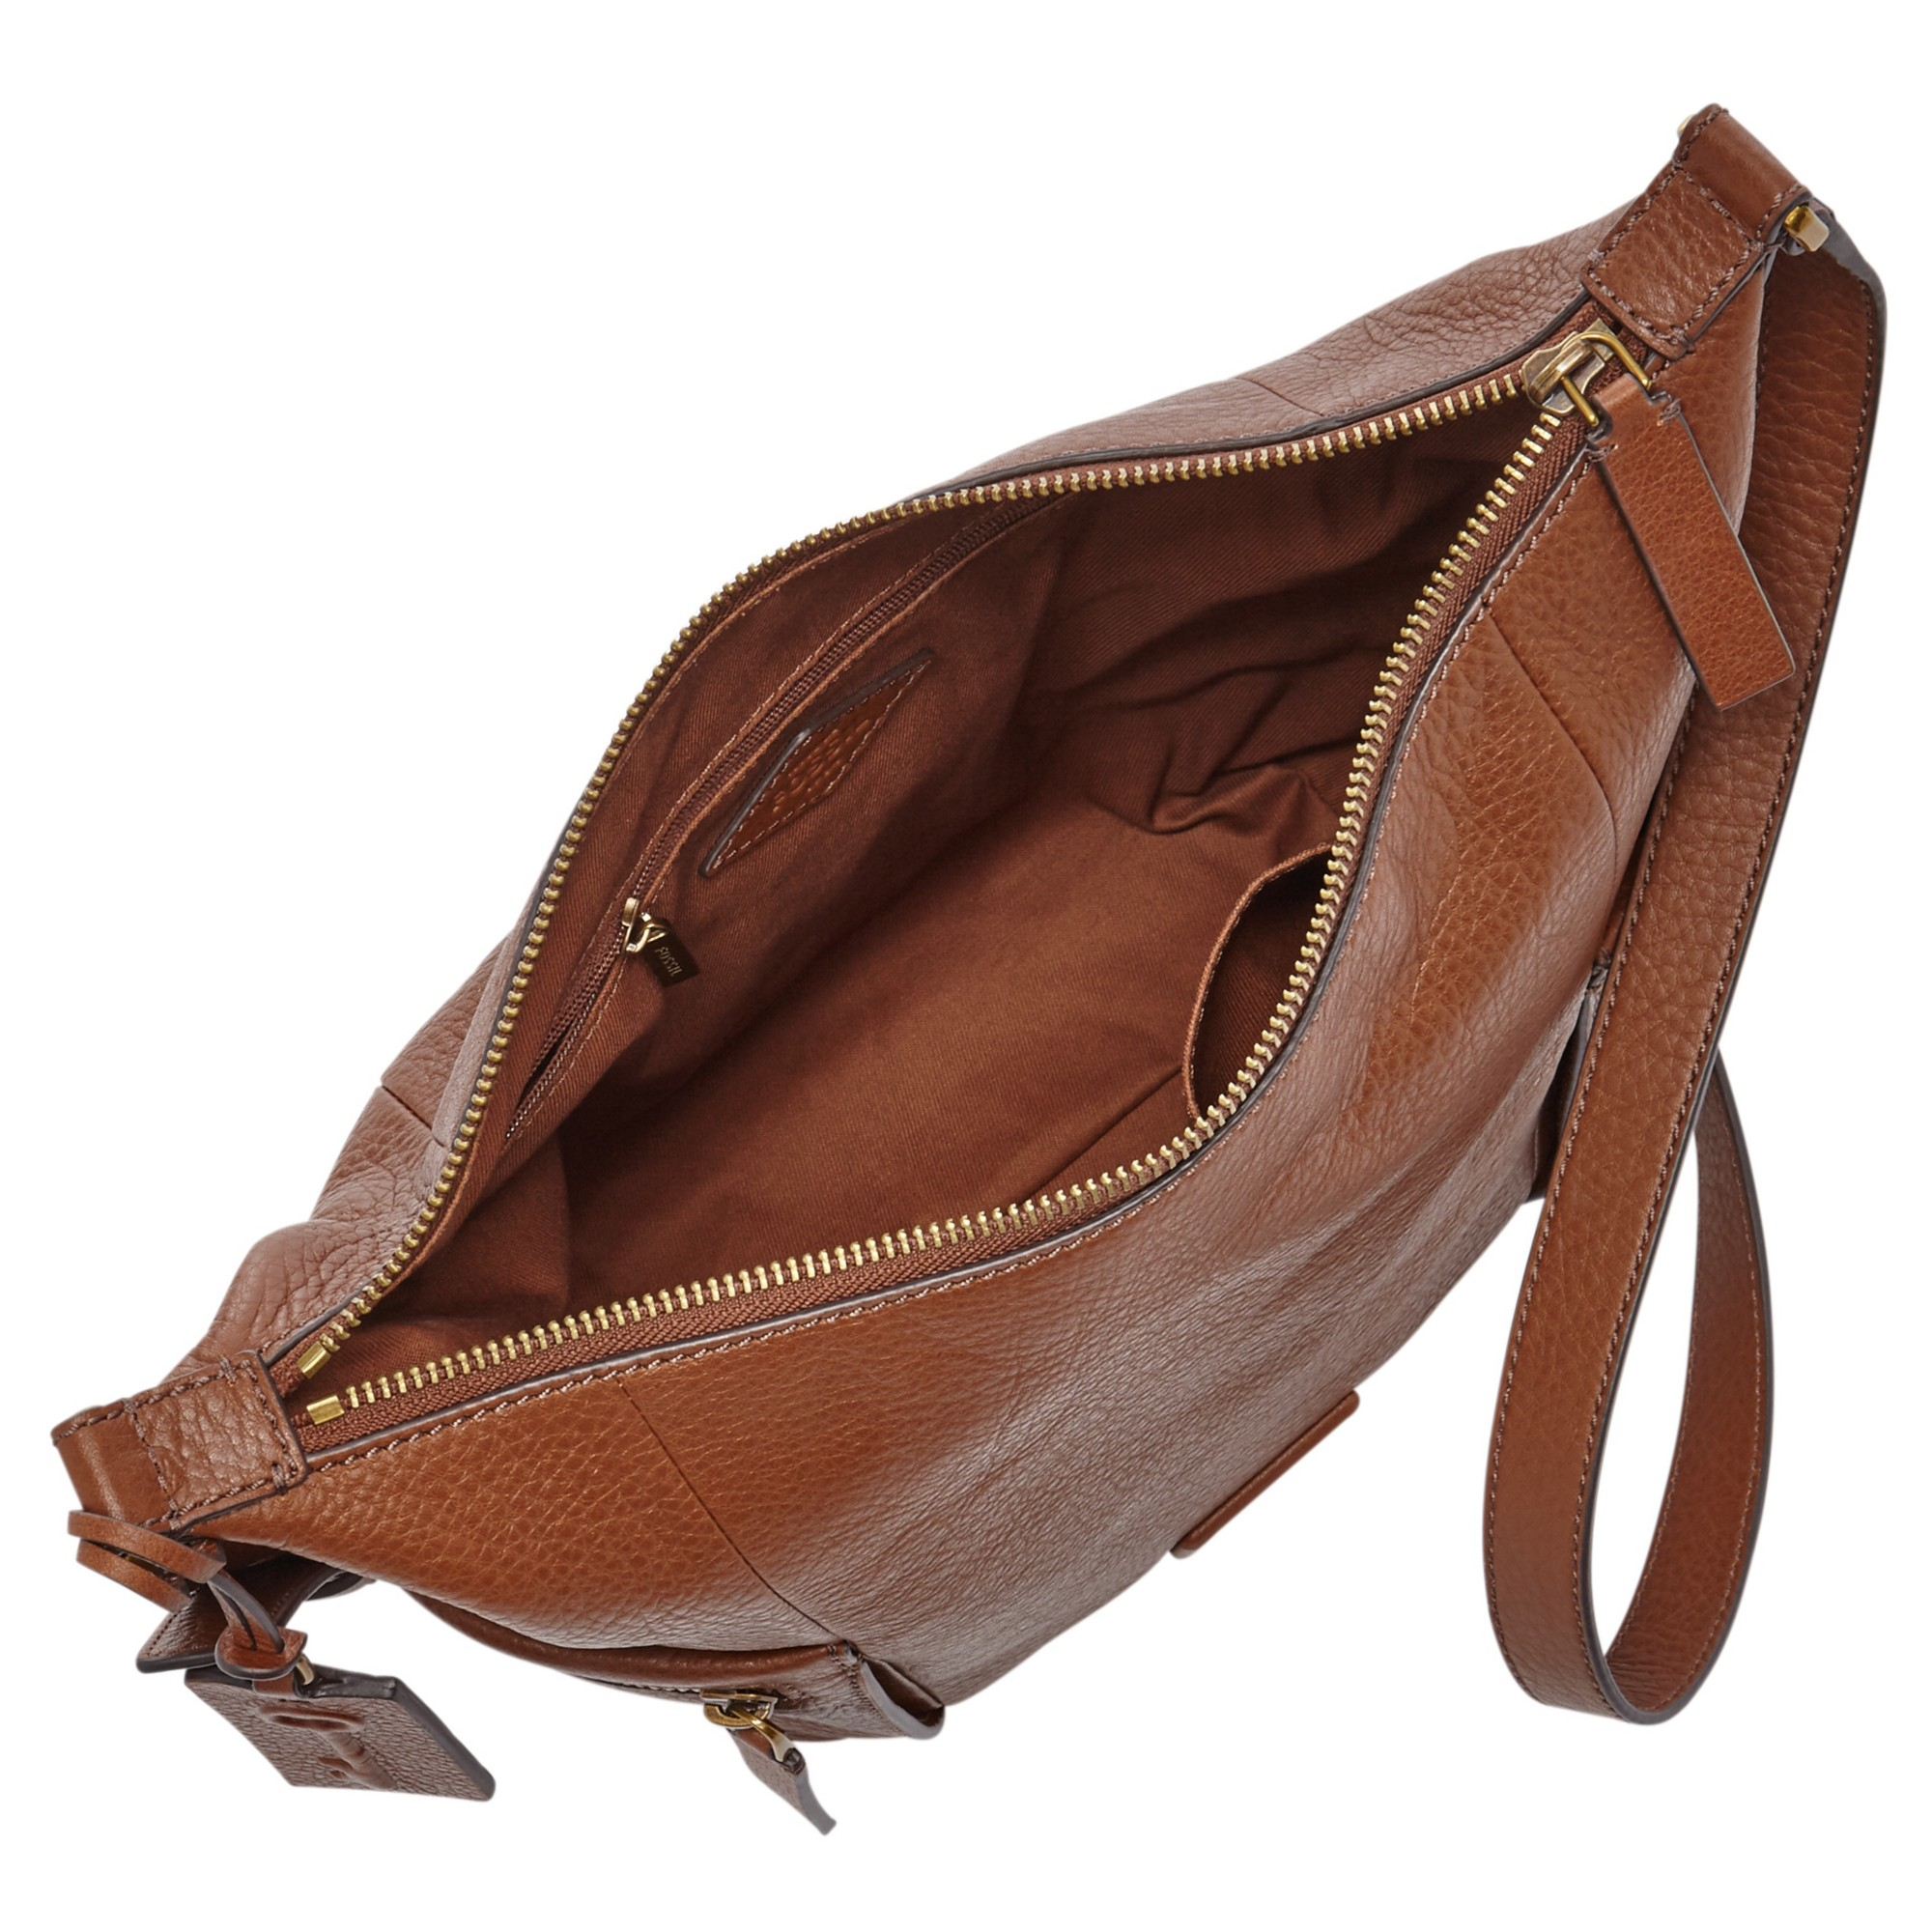 Fossil Emerson Small Leather Hobo Bag in Tan (Brown) - Lyst